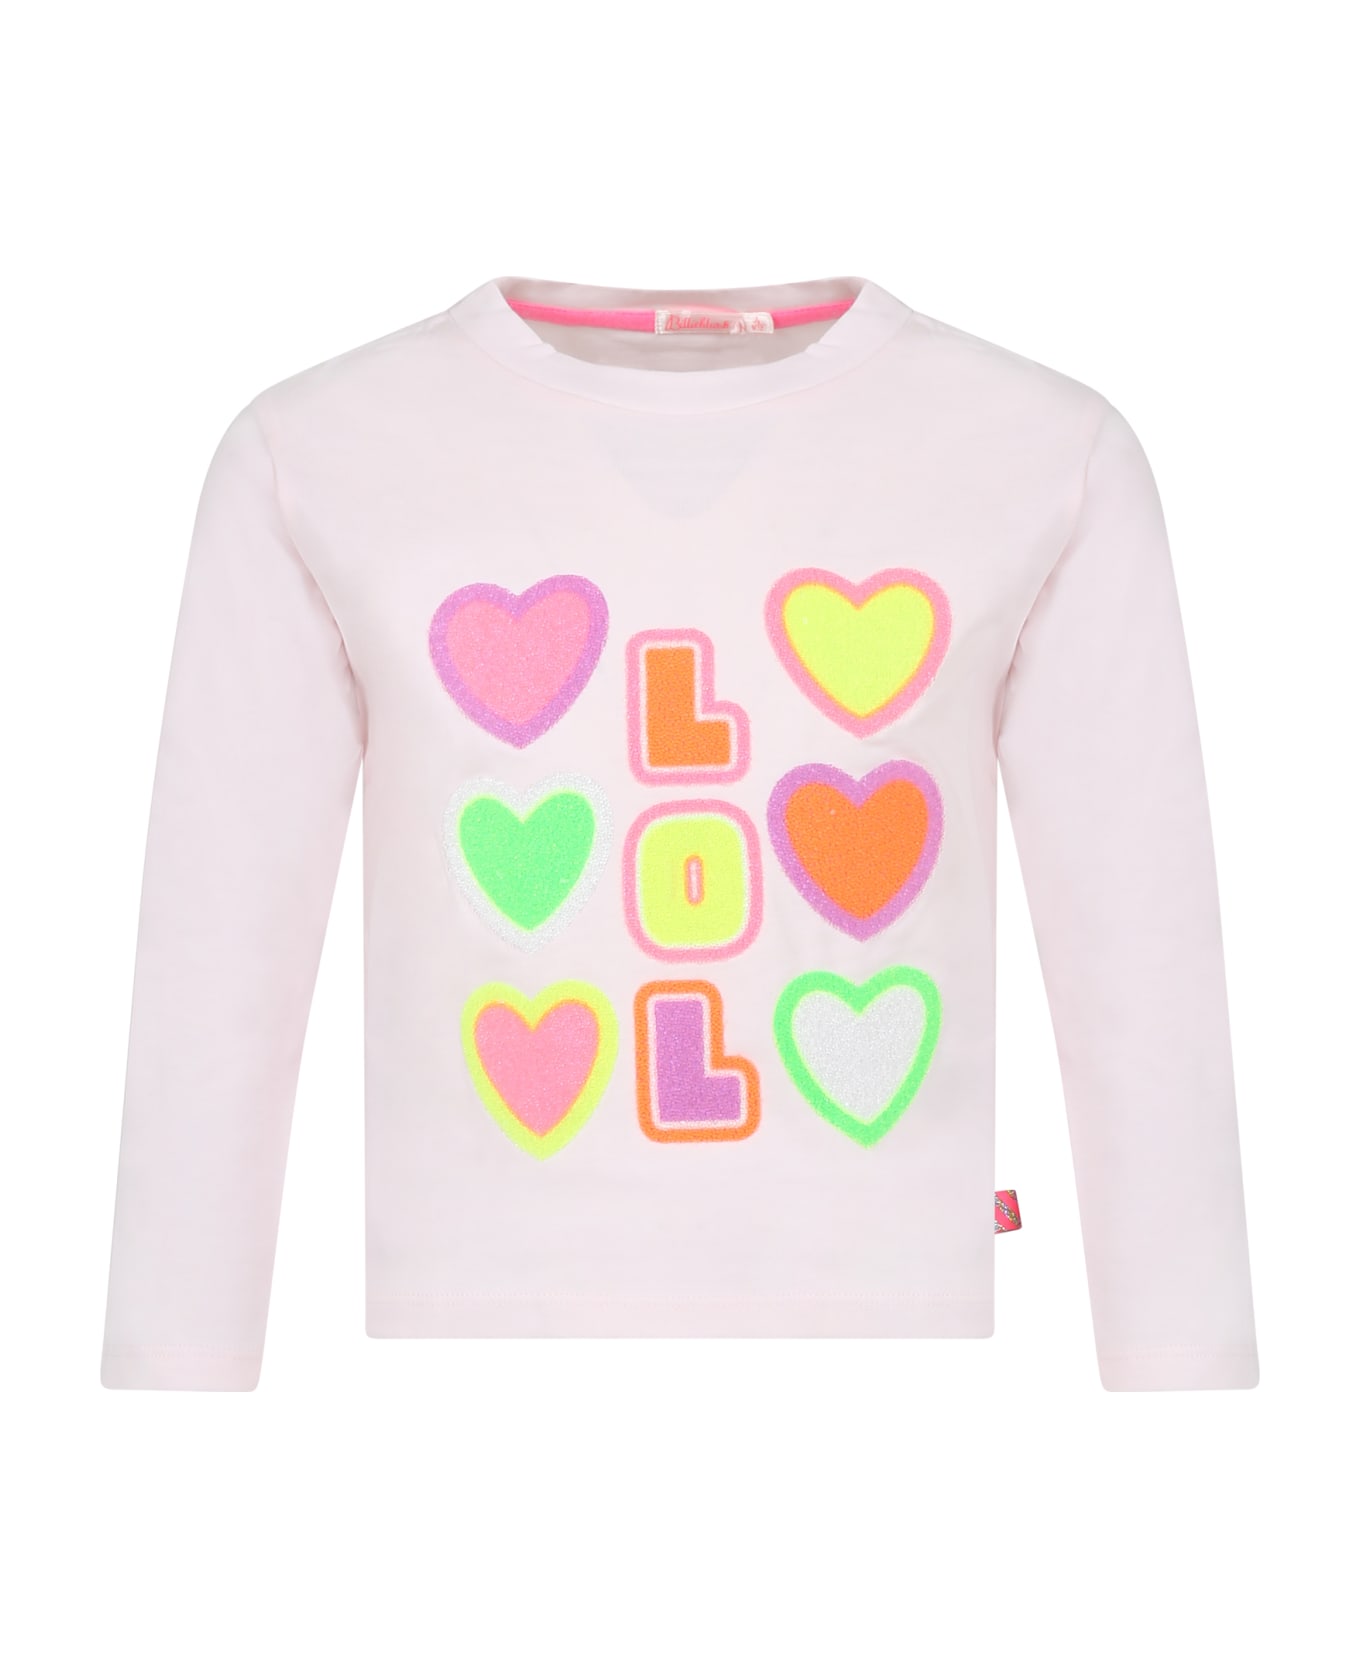 Billieblush Pink T-shirt For Girl With Heart And Writing - Pink